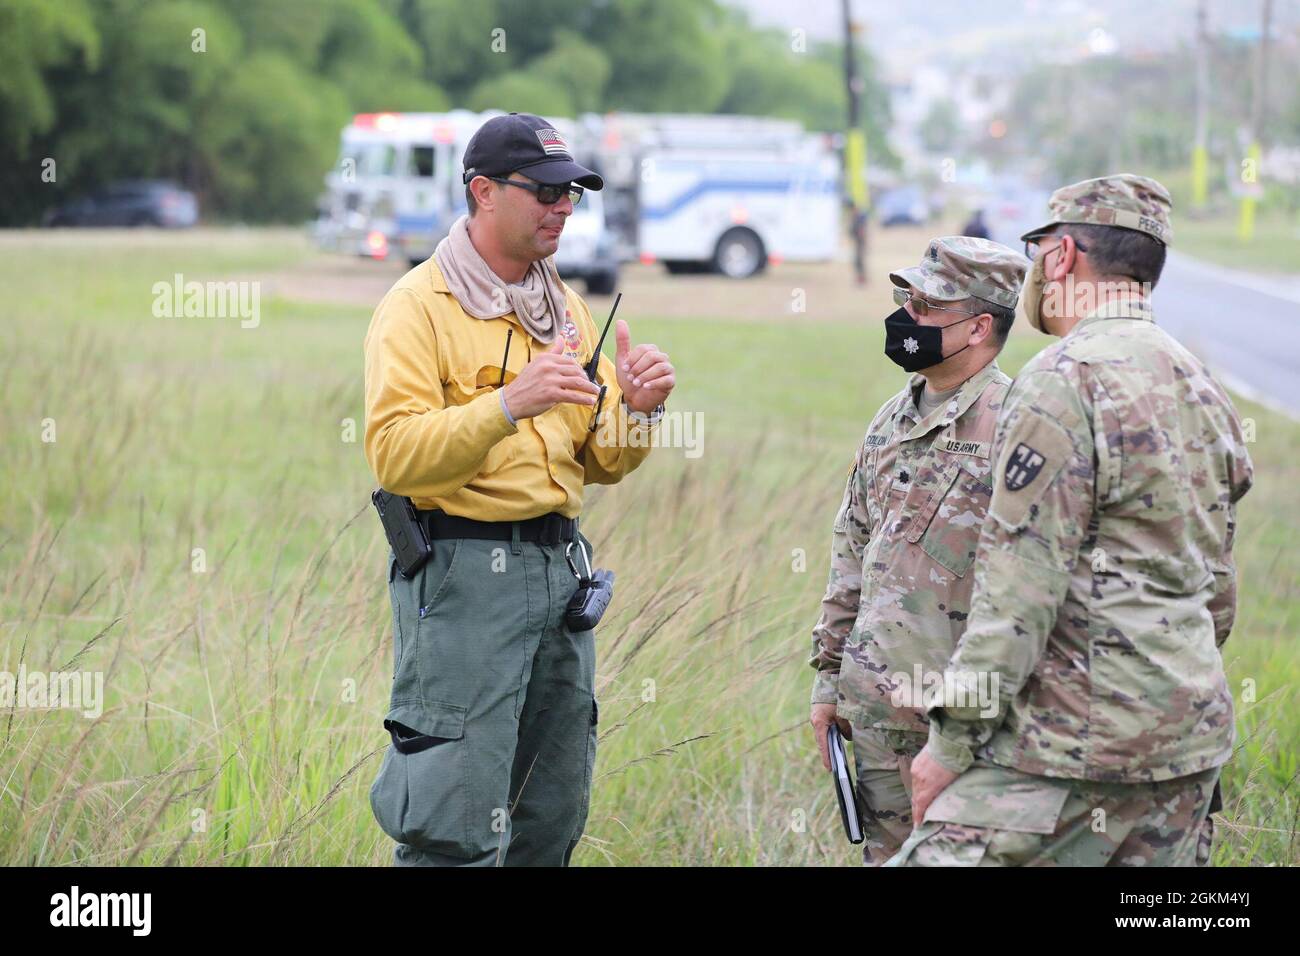 Fire Lt. Joel Figueroa, left, discusses the operations with Lt. Col. Rodolfo Colón and Col. Víctor Pérez at Gurabo, Puerto Rico, May 22, 2021. The Governor of Puerto Rico, Pedro Pierluisi, activated the National Guard in support of the Puerto Rico Fire Department to fight fires in the municipalities of Gurabo and Cayey to protect residents' health, well-being, and property. Stock Photo